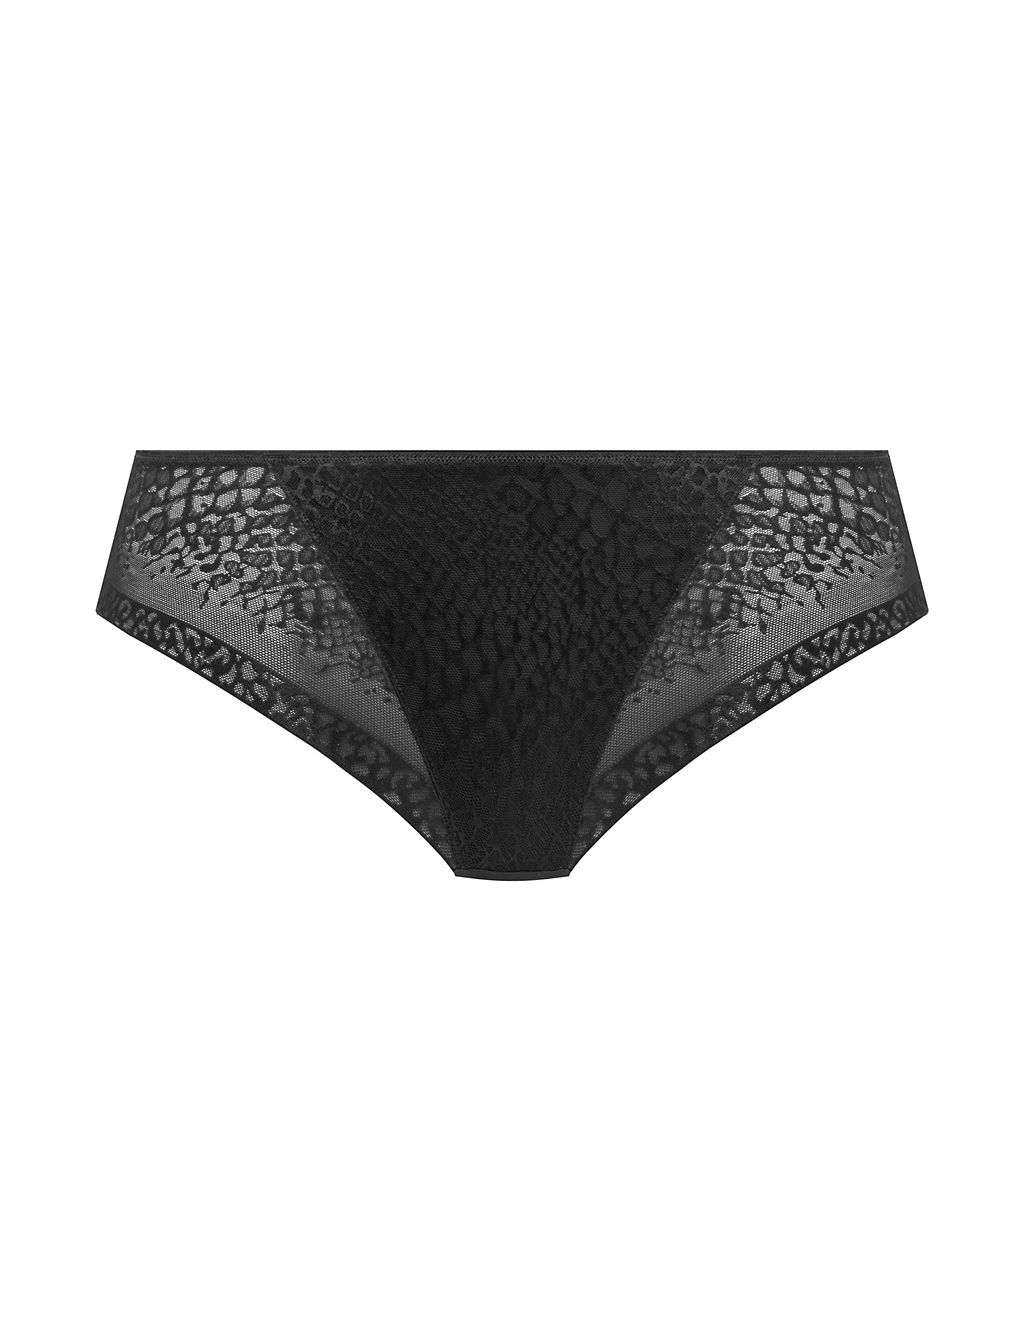 Envisage Jacquard Lace Knickers 1 of 6